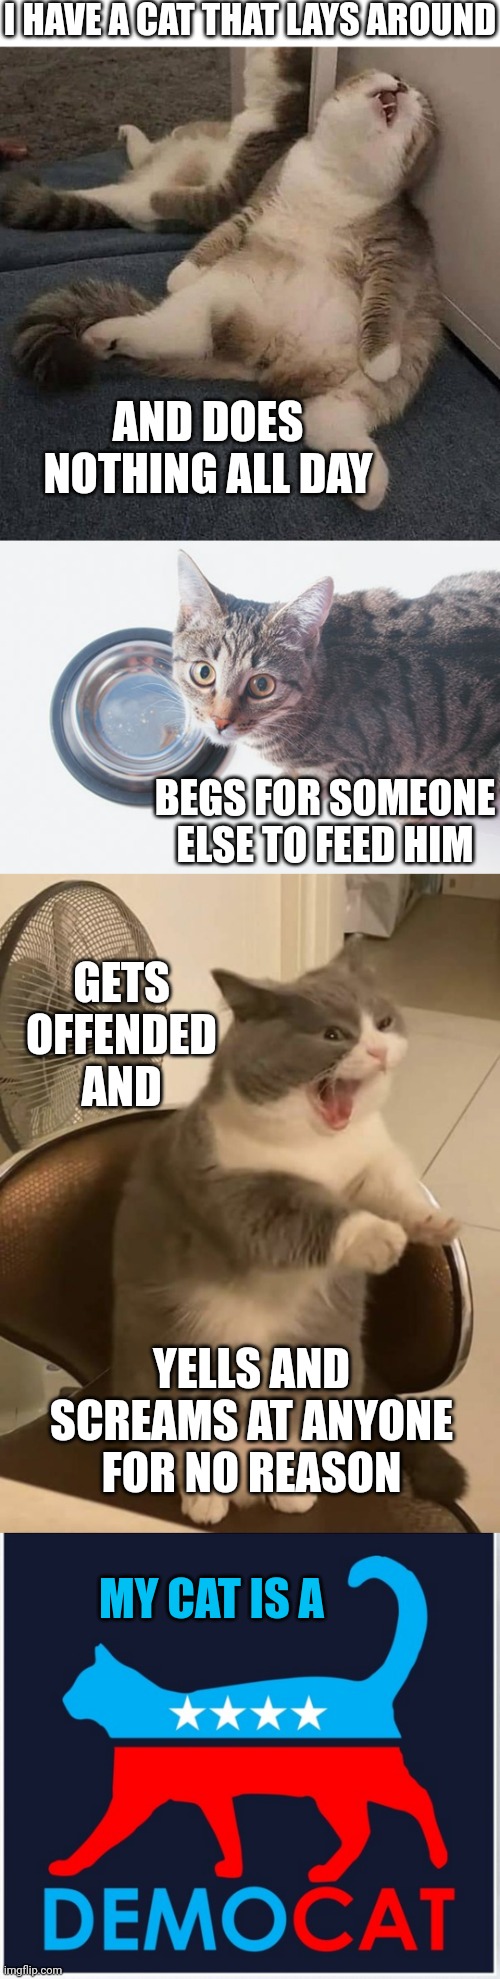 Political cat | I HAVE A CAT THAT LAYS AROUND; AND DOES NOTHING ALL DAY; BEGS FOR SOMEONE ELSE TO FEED HIM; GETS OFFENDED AND; YELLS AND SCREAMS AT ANYONE FOR NO REASON; MY CAT IS A | image tagged in blank white template,political meme,cat,democrat | made w/ Imgflip meme maker